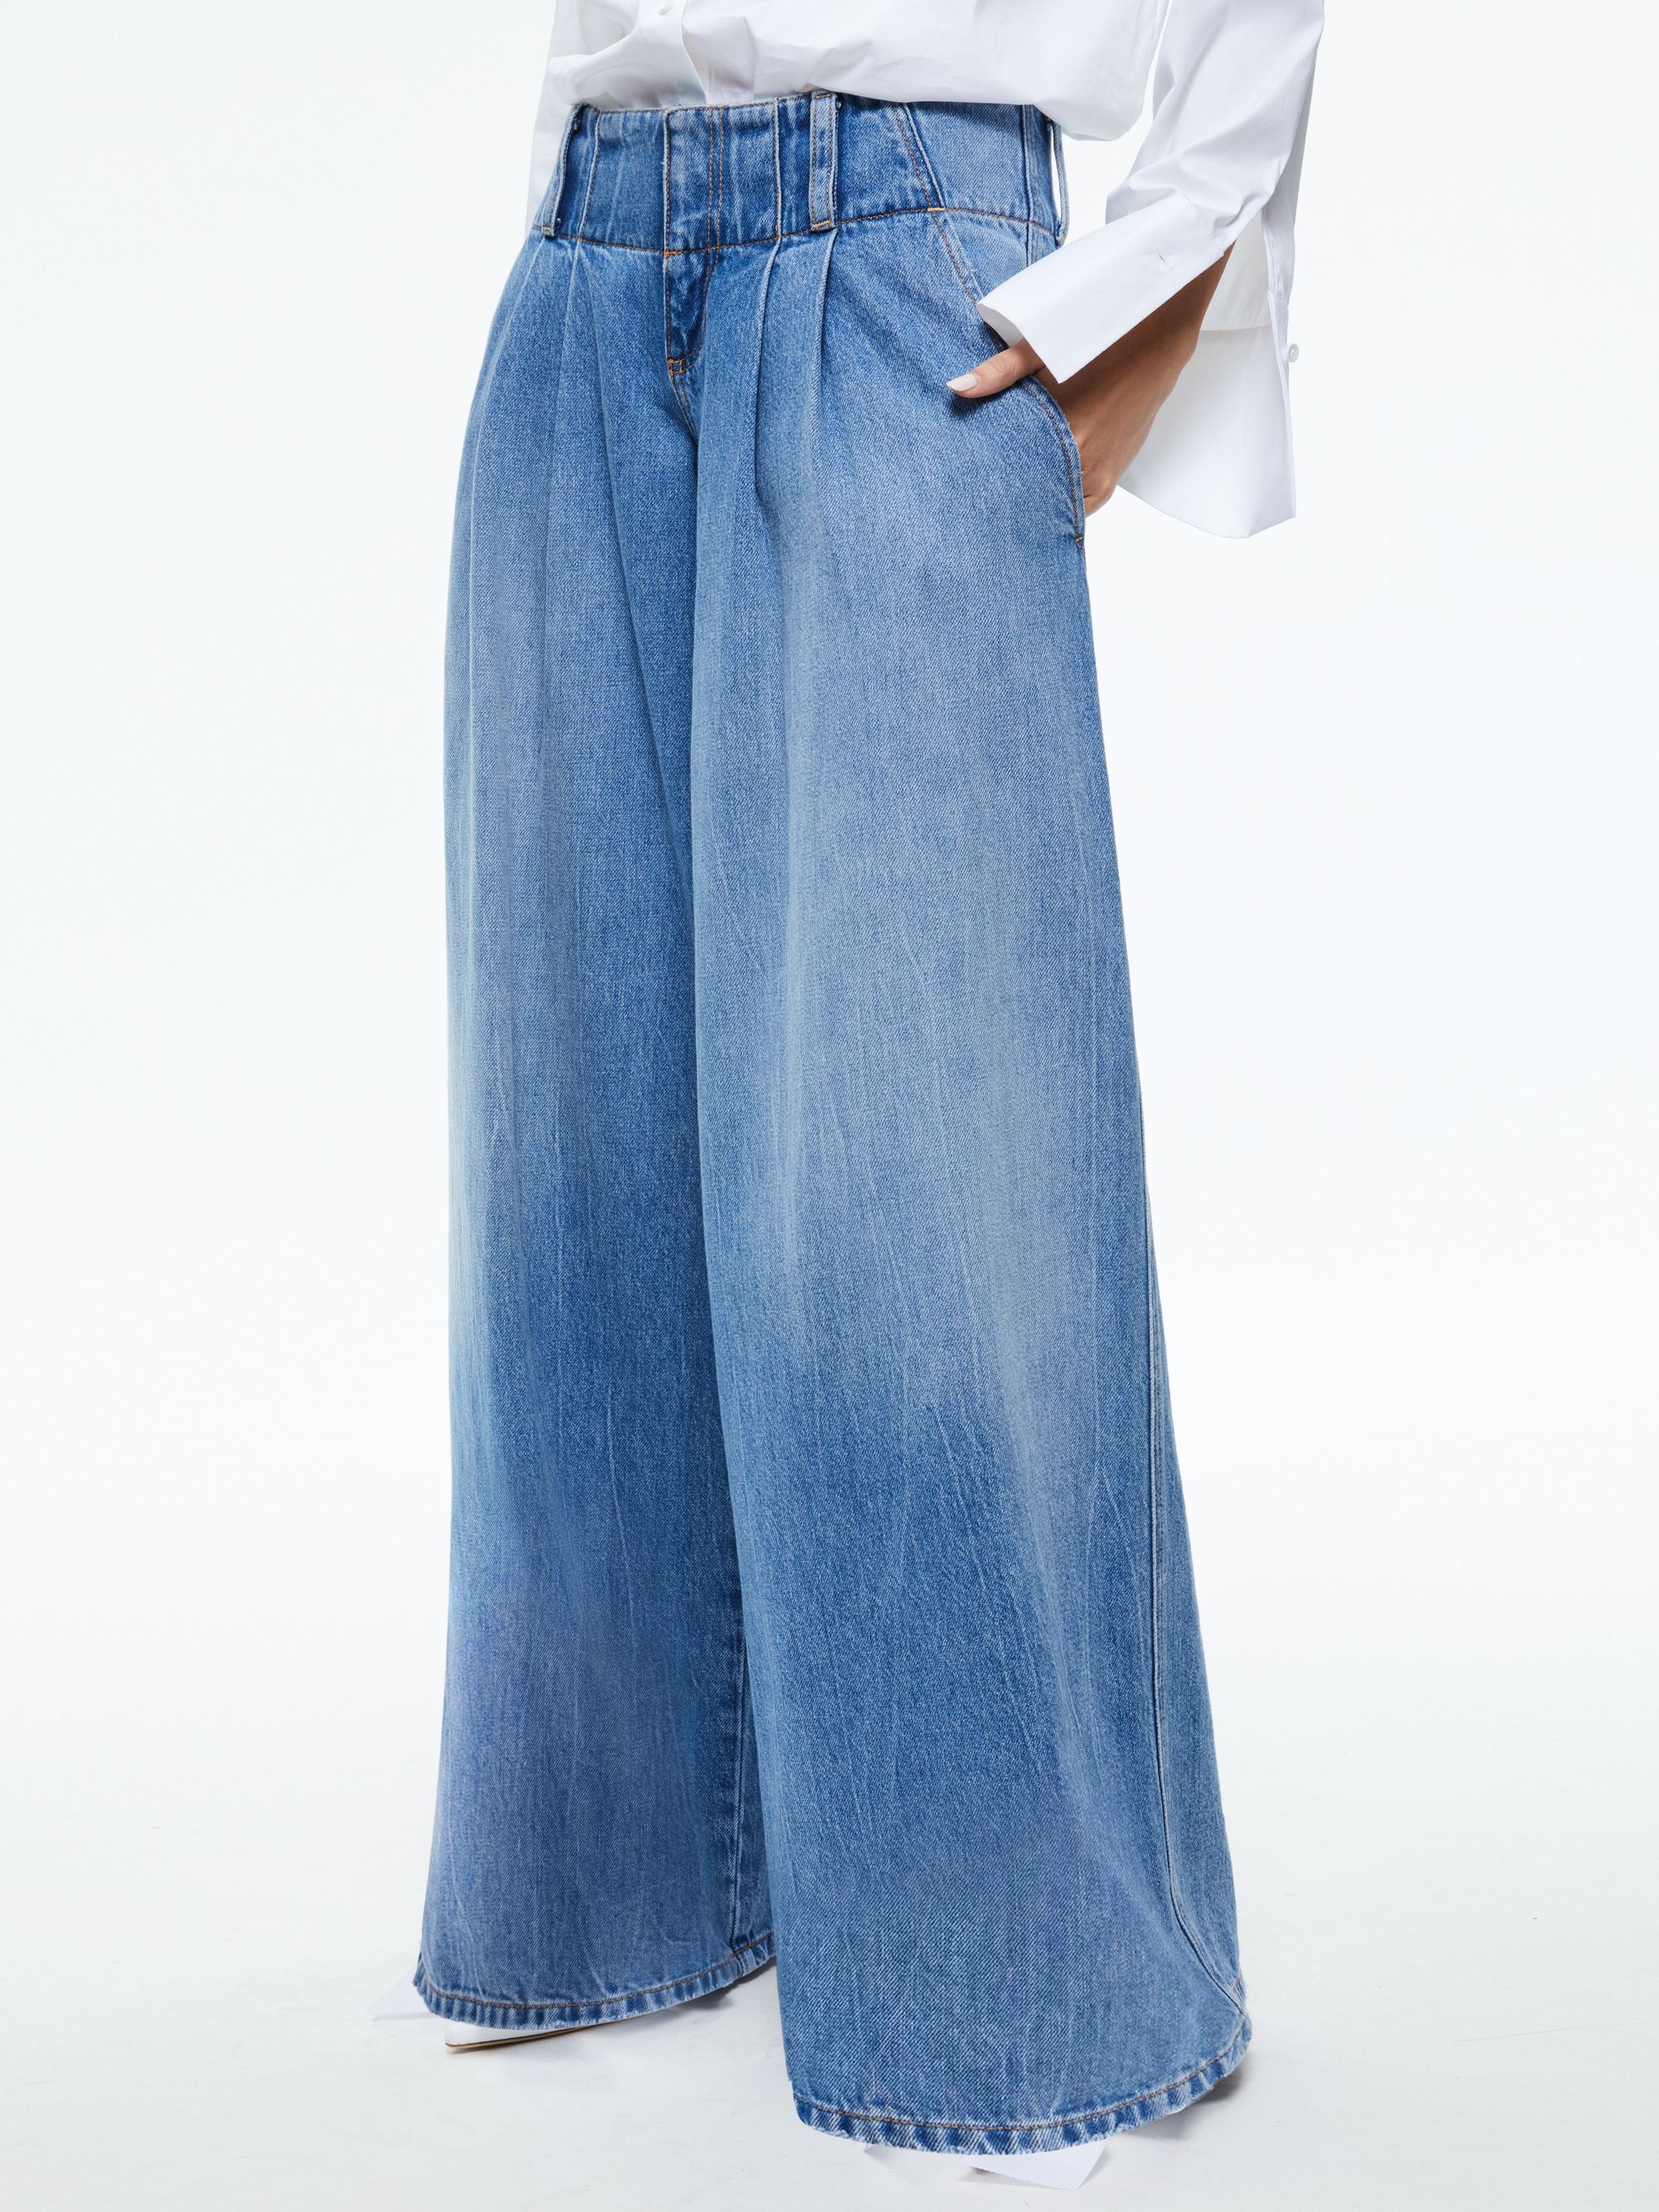 ANDERS LOW RISE PLEATED JEAN | Alice + Olivia